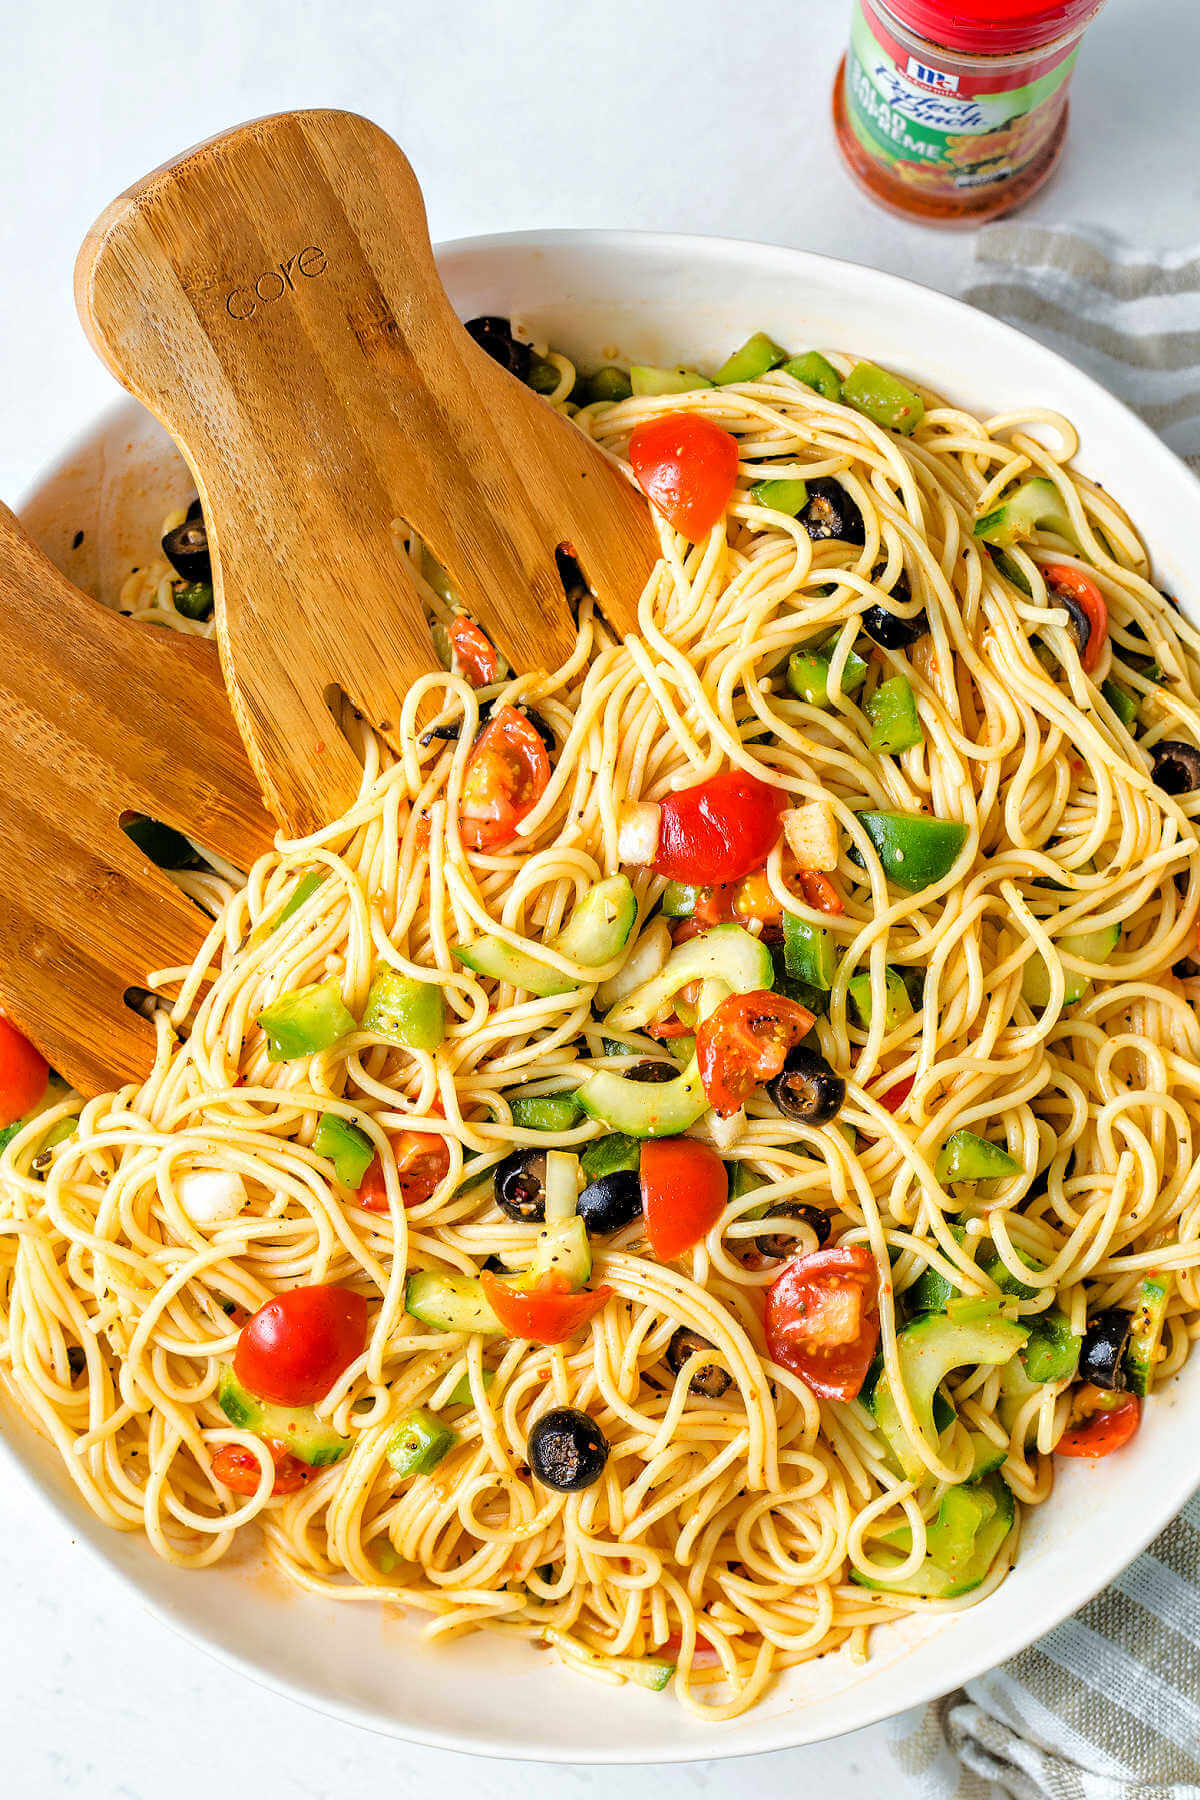 ingredients tossed together in a bowl with wooden salad tongs for spaghetti pasta salad.